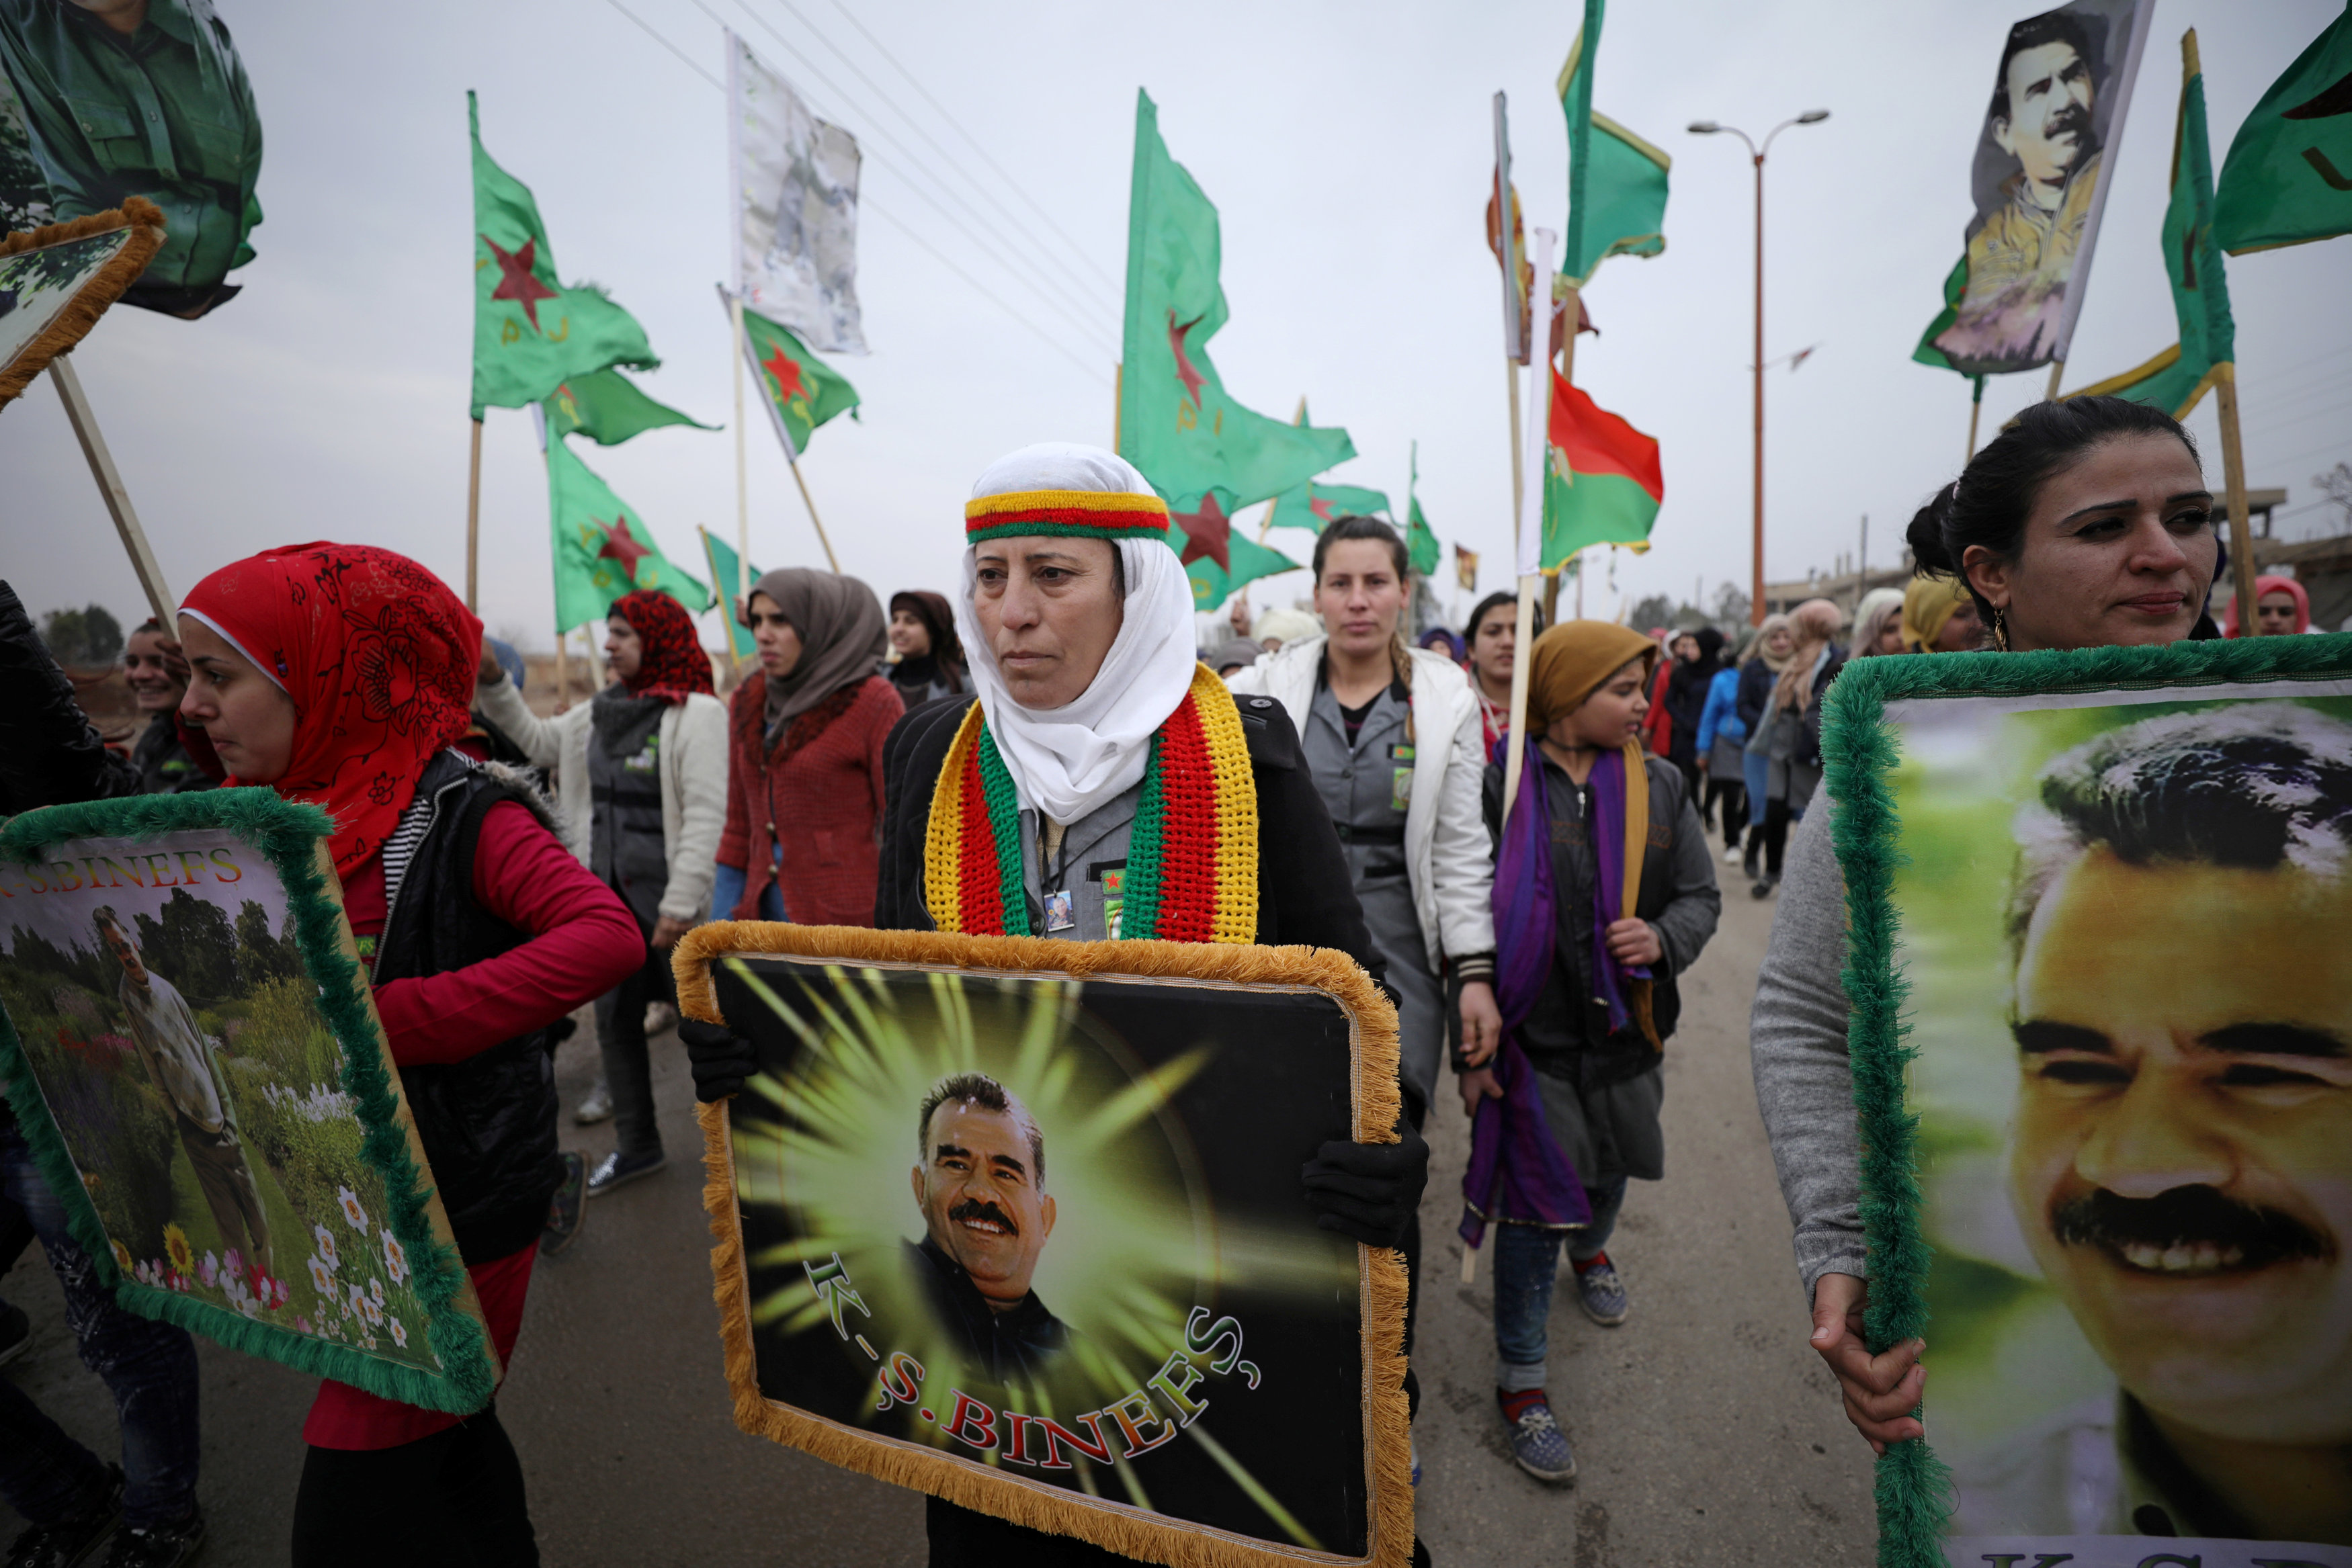 A woman holds a picture of Kurdish leader Abdullah Ocalan of PKK during a protest against Turkish attacks on Afrin, in Hasaka province, Syria, Jan. 18, 2018.